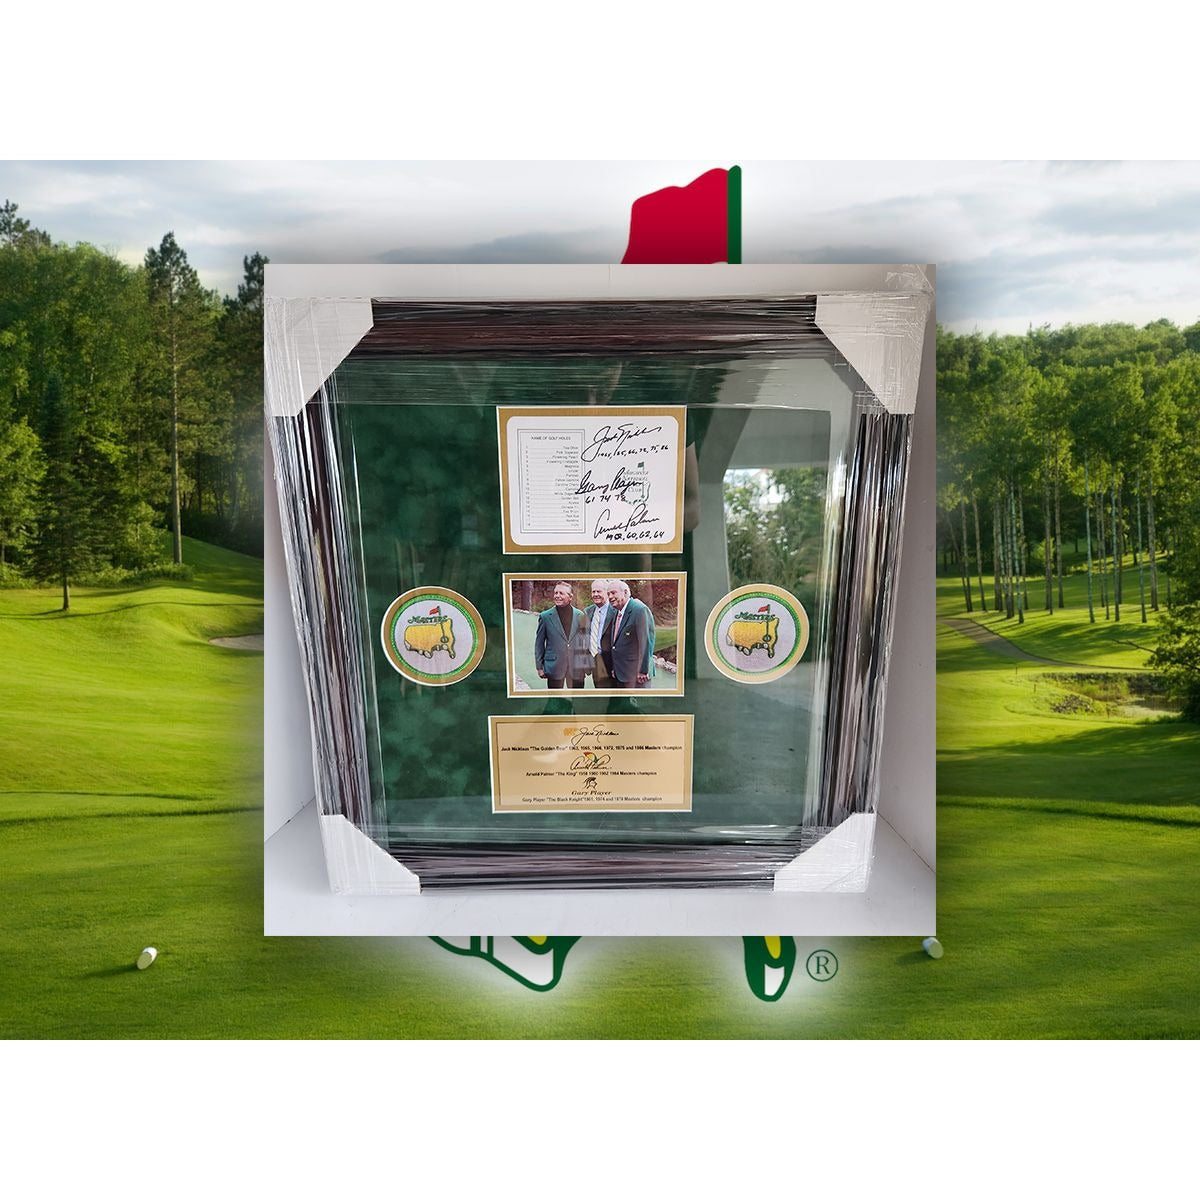 Jack Nicklaus Arnold Palmer Gary Player Masters Golf scorecard signed and framed 23.5x22.5 with proof